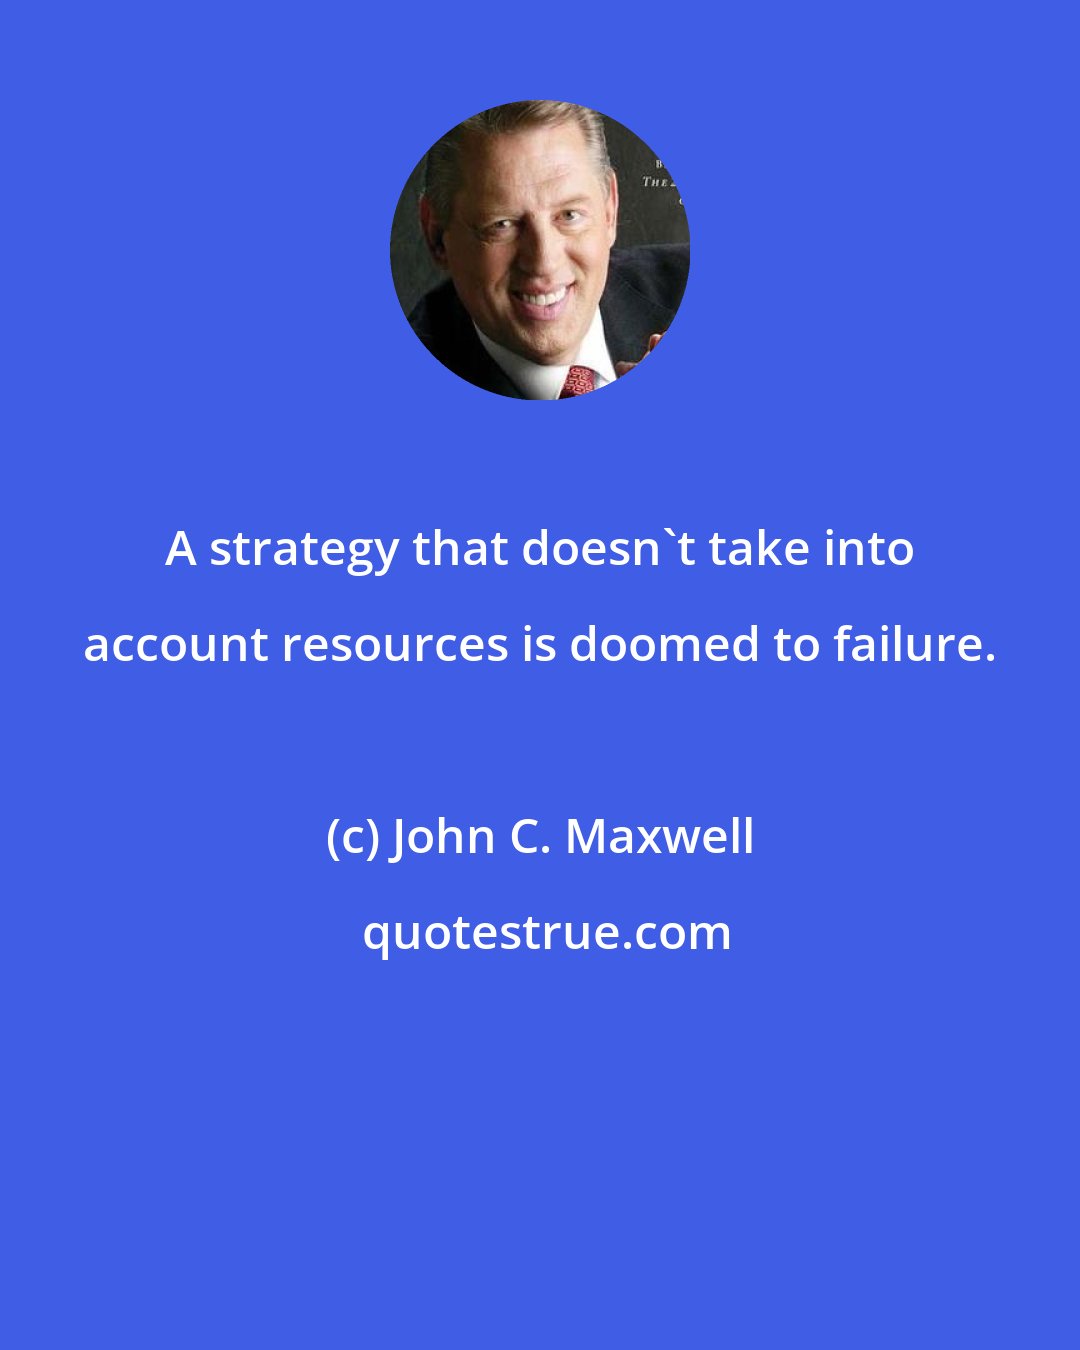 John C. Maxwell: A strategy that doesn't take into account resources is doomed to failure.